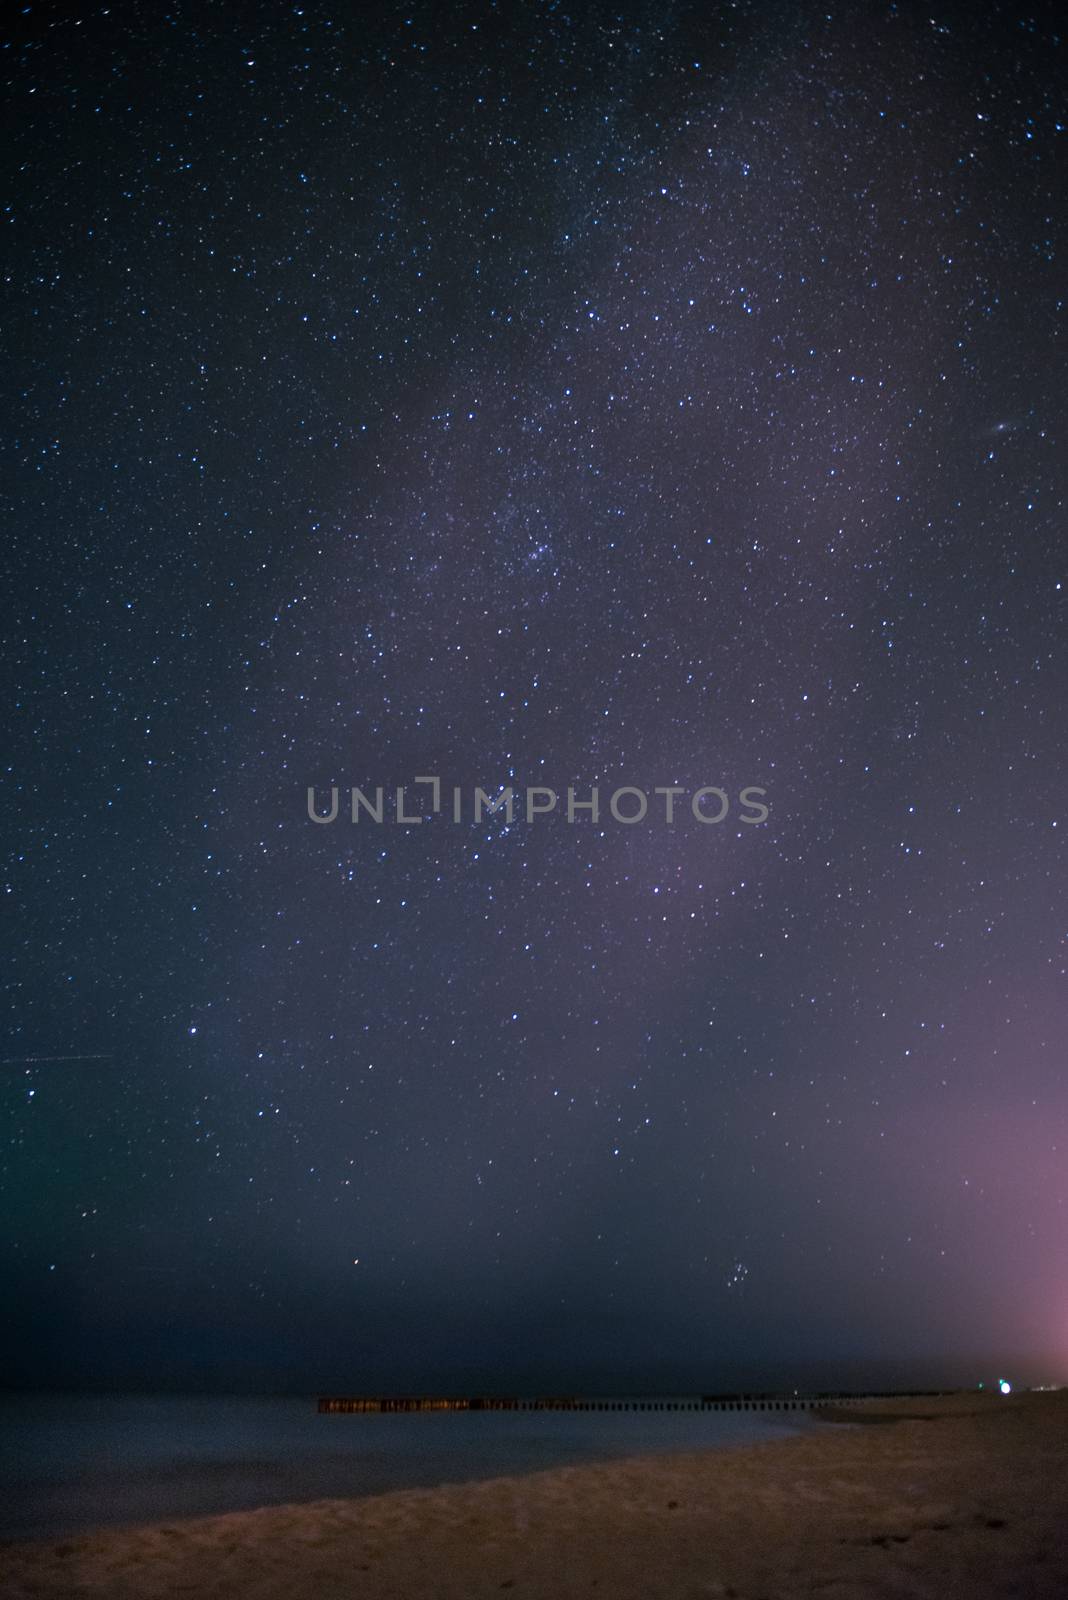 Universe filled with stars, nebula and galaxy. HQ background with Milkyway